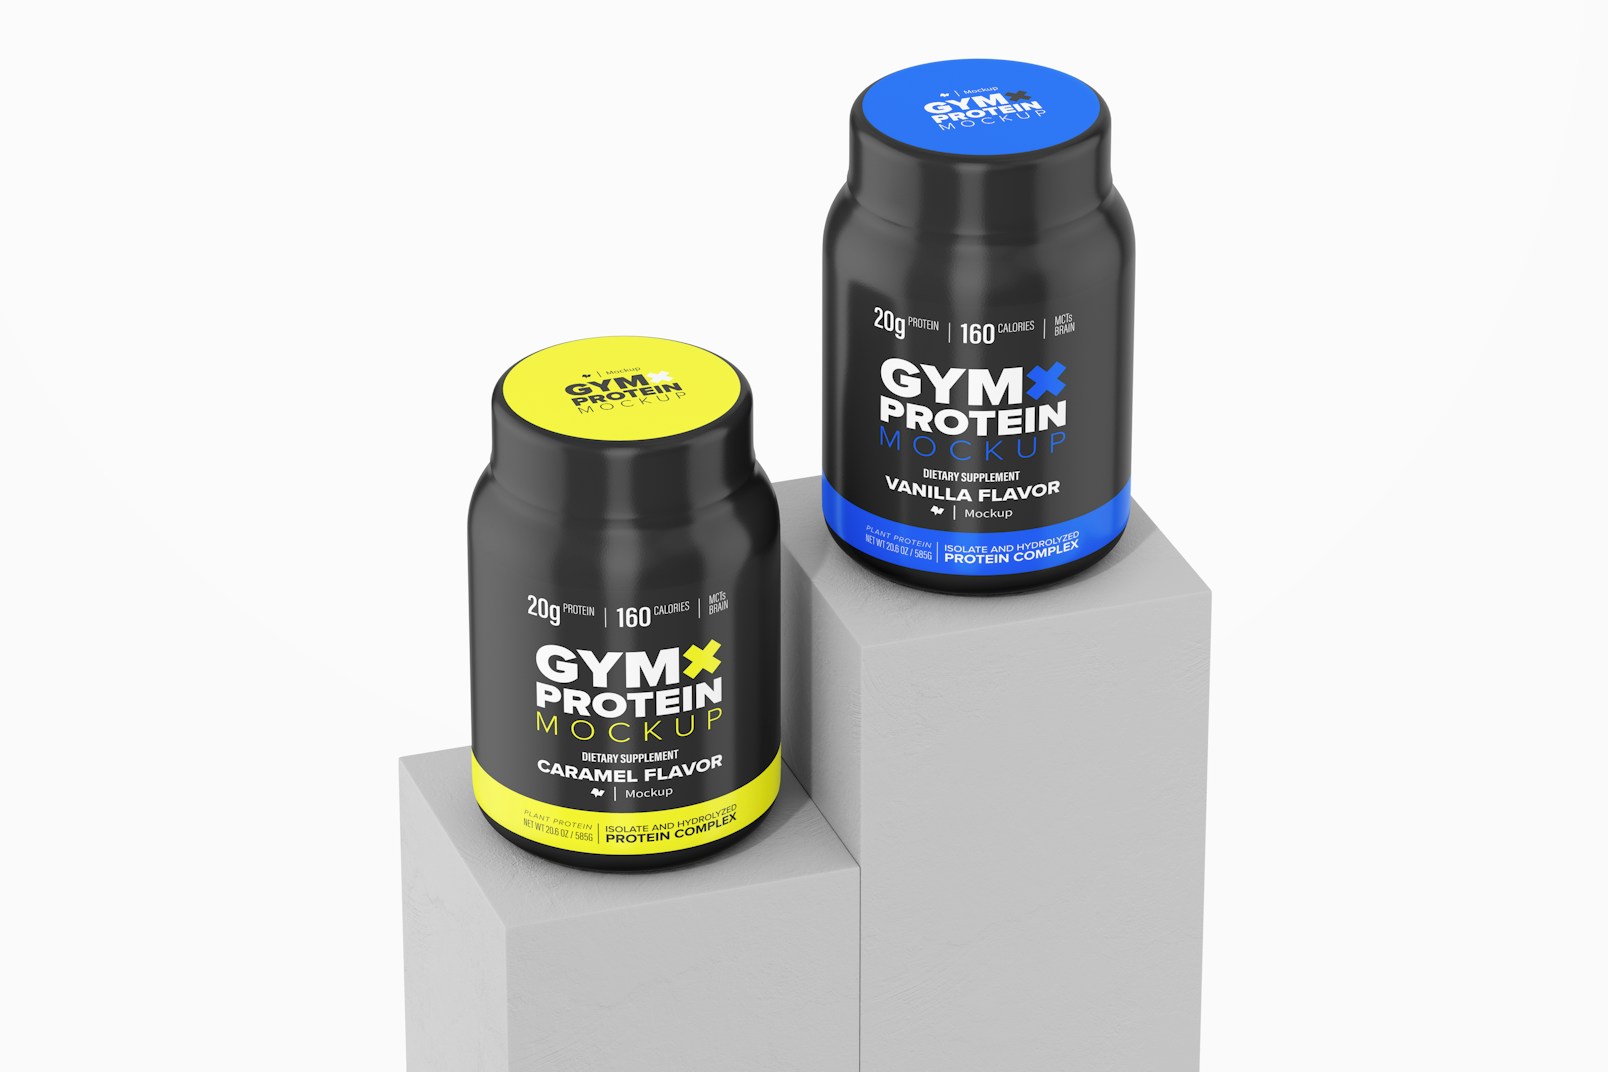 20 gr Protein Powder Containers Mockup